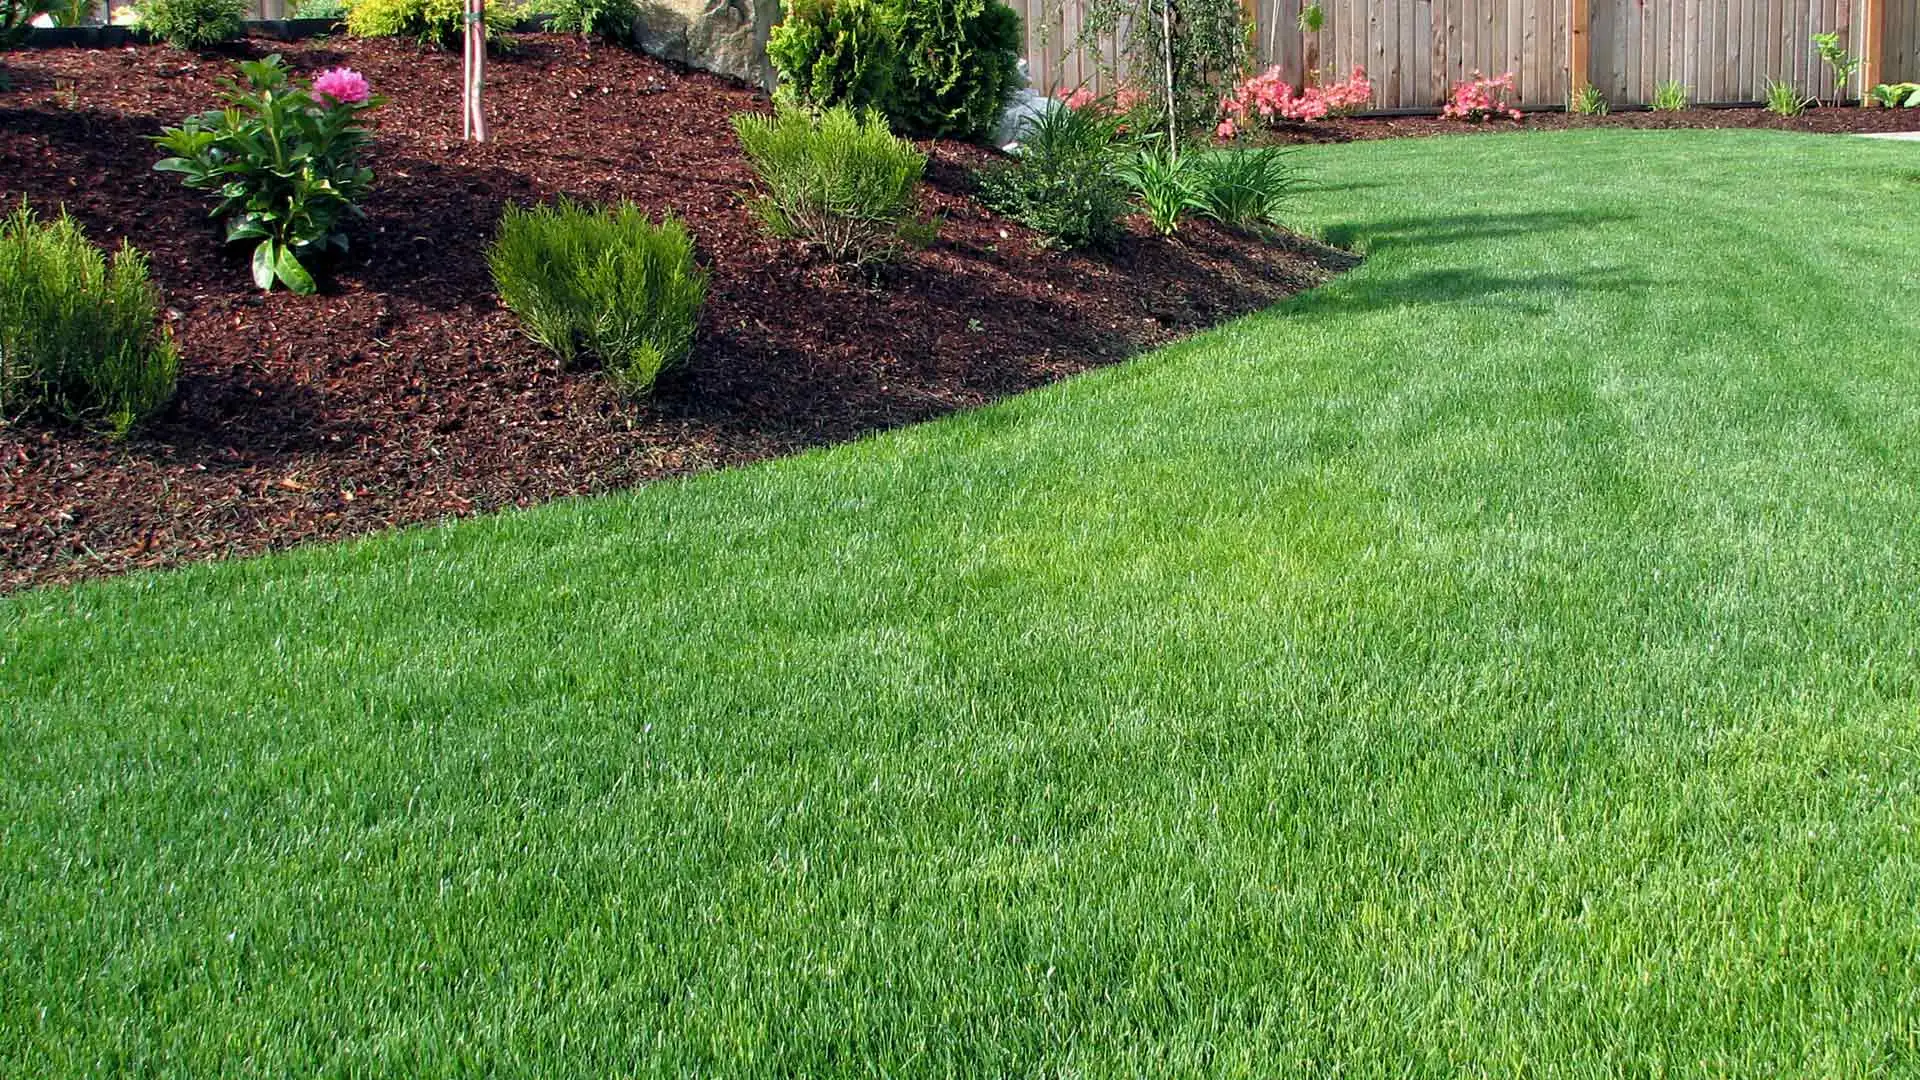 Landscape bed and lawn maintained by professionals in Springhurst, KY.